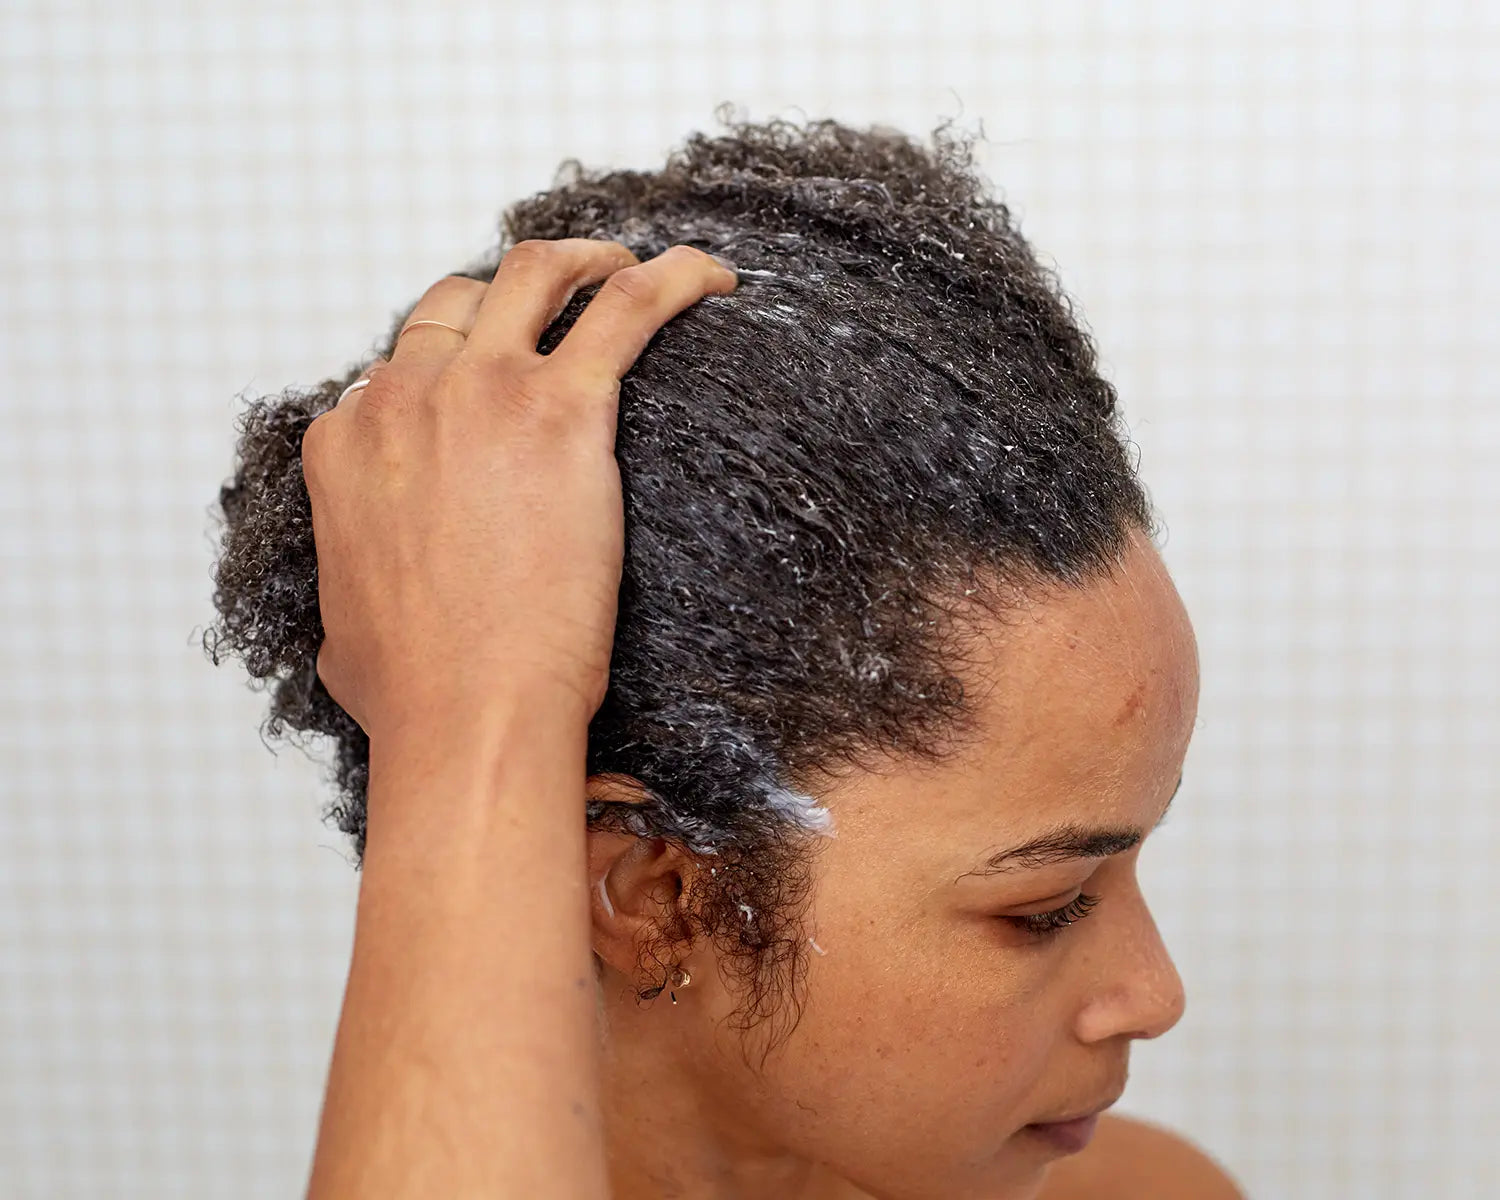 How to Care for Coarse Hair